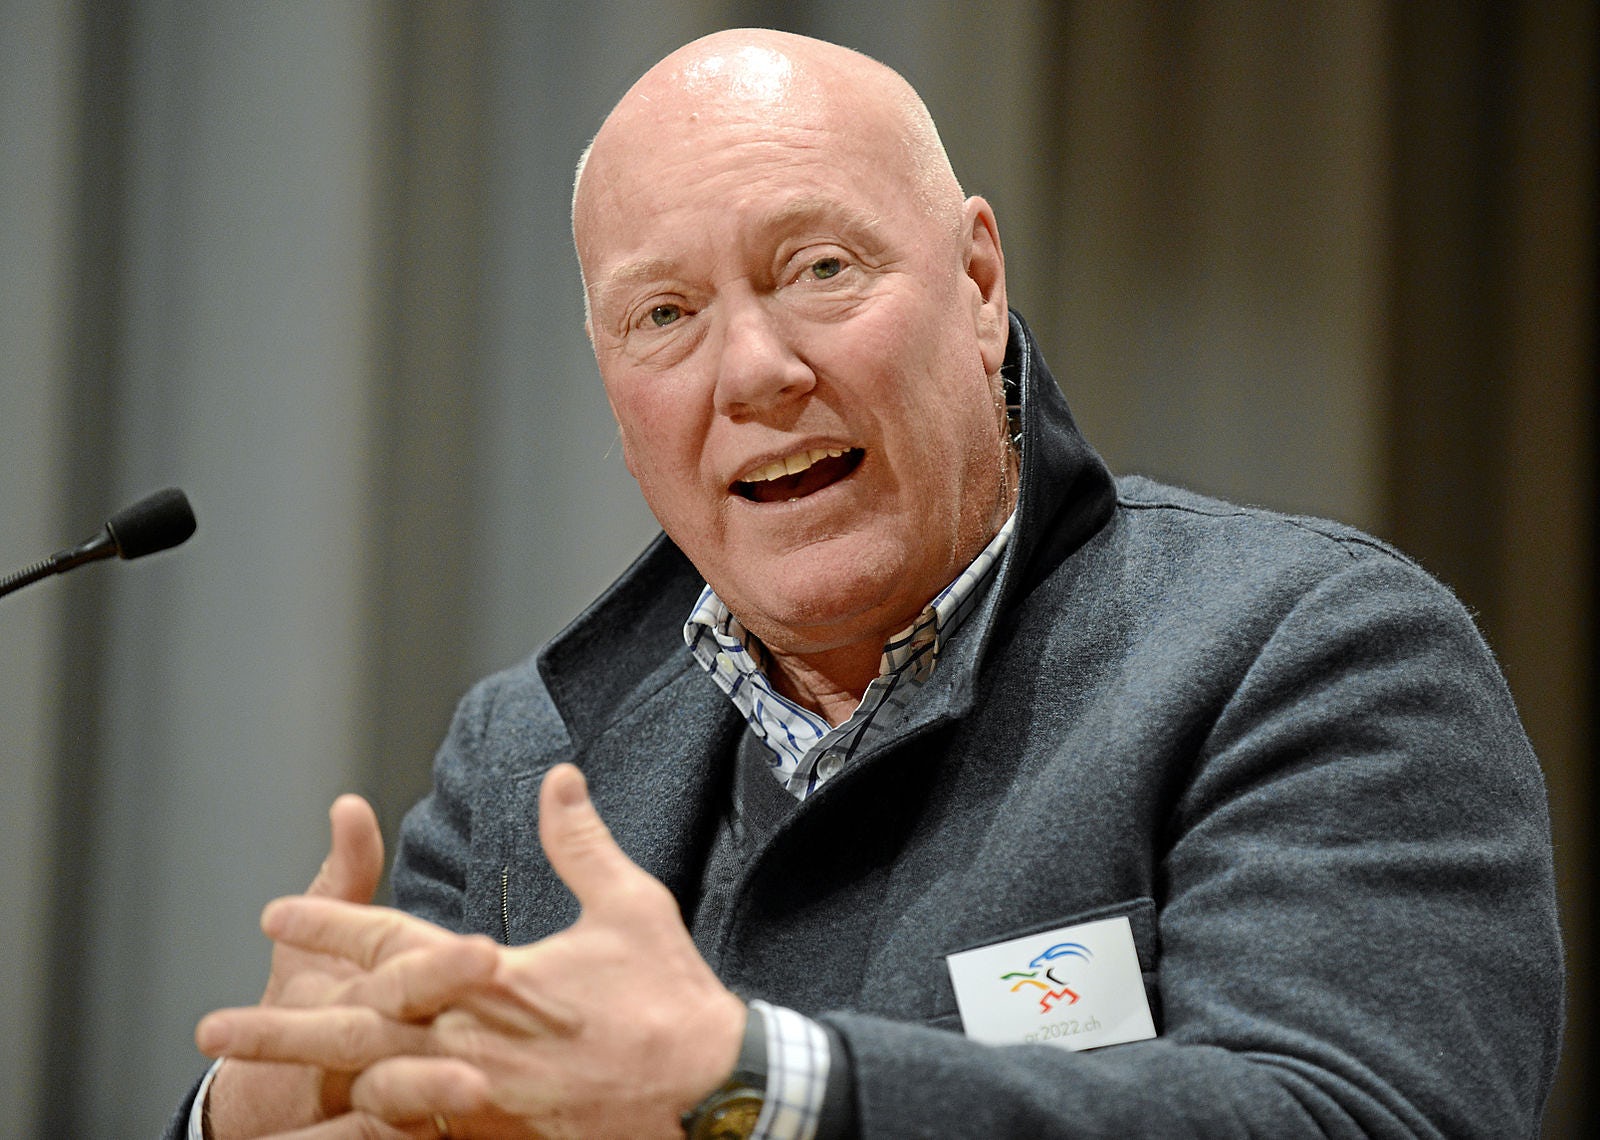 Jean claude biver Stock Photos and Images